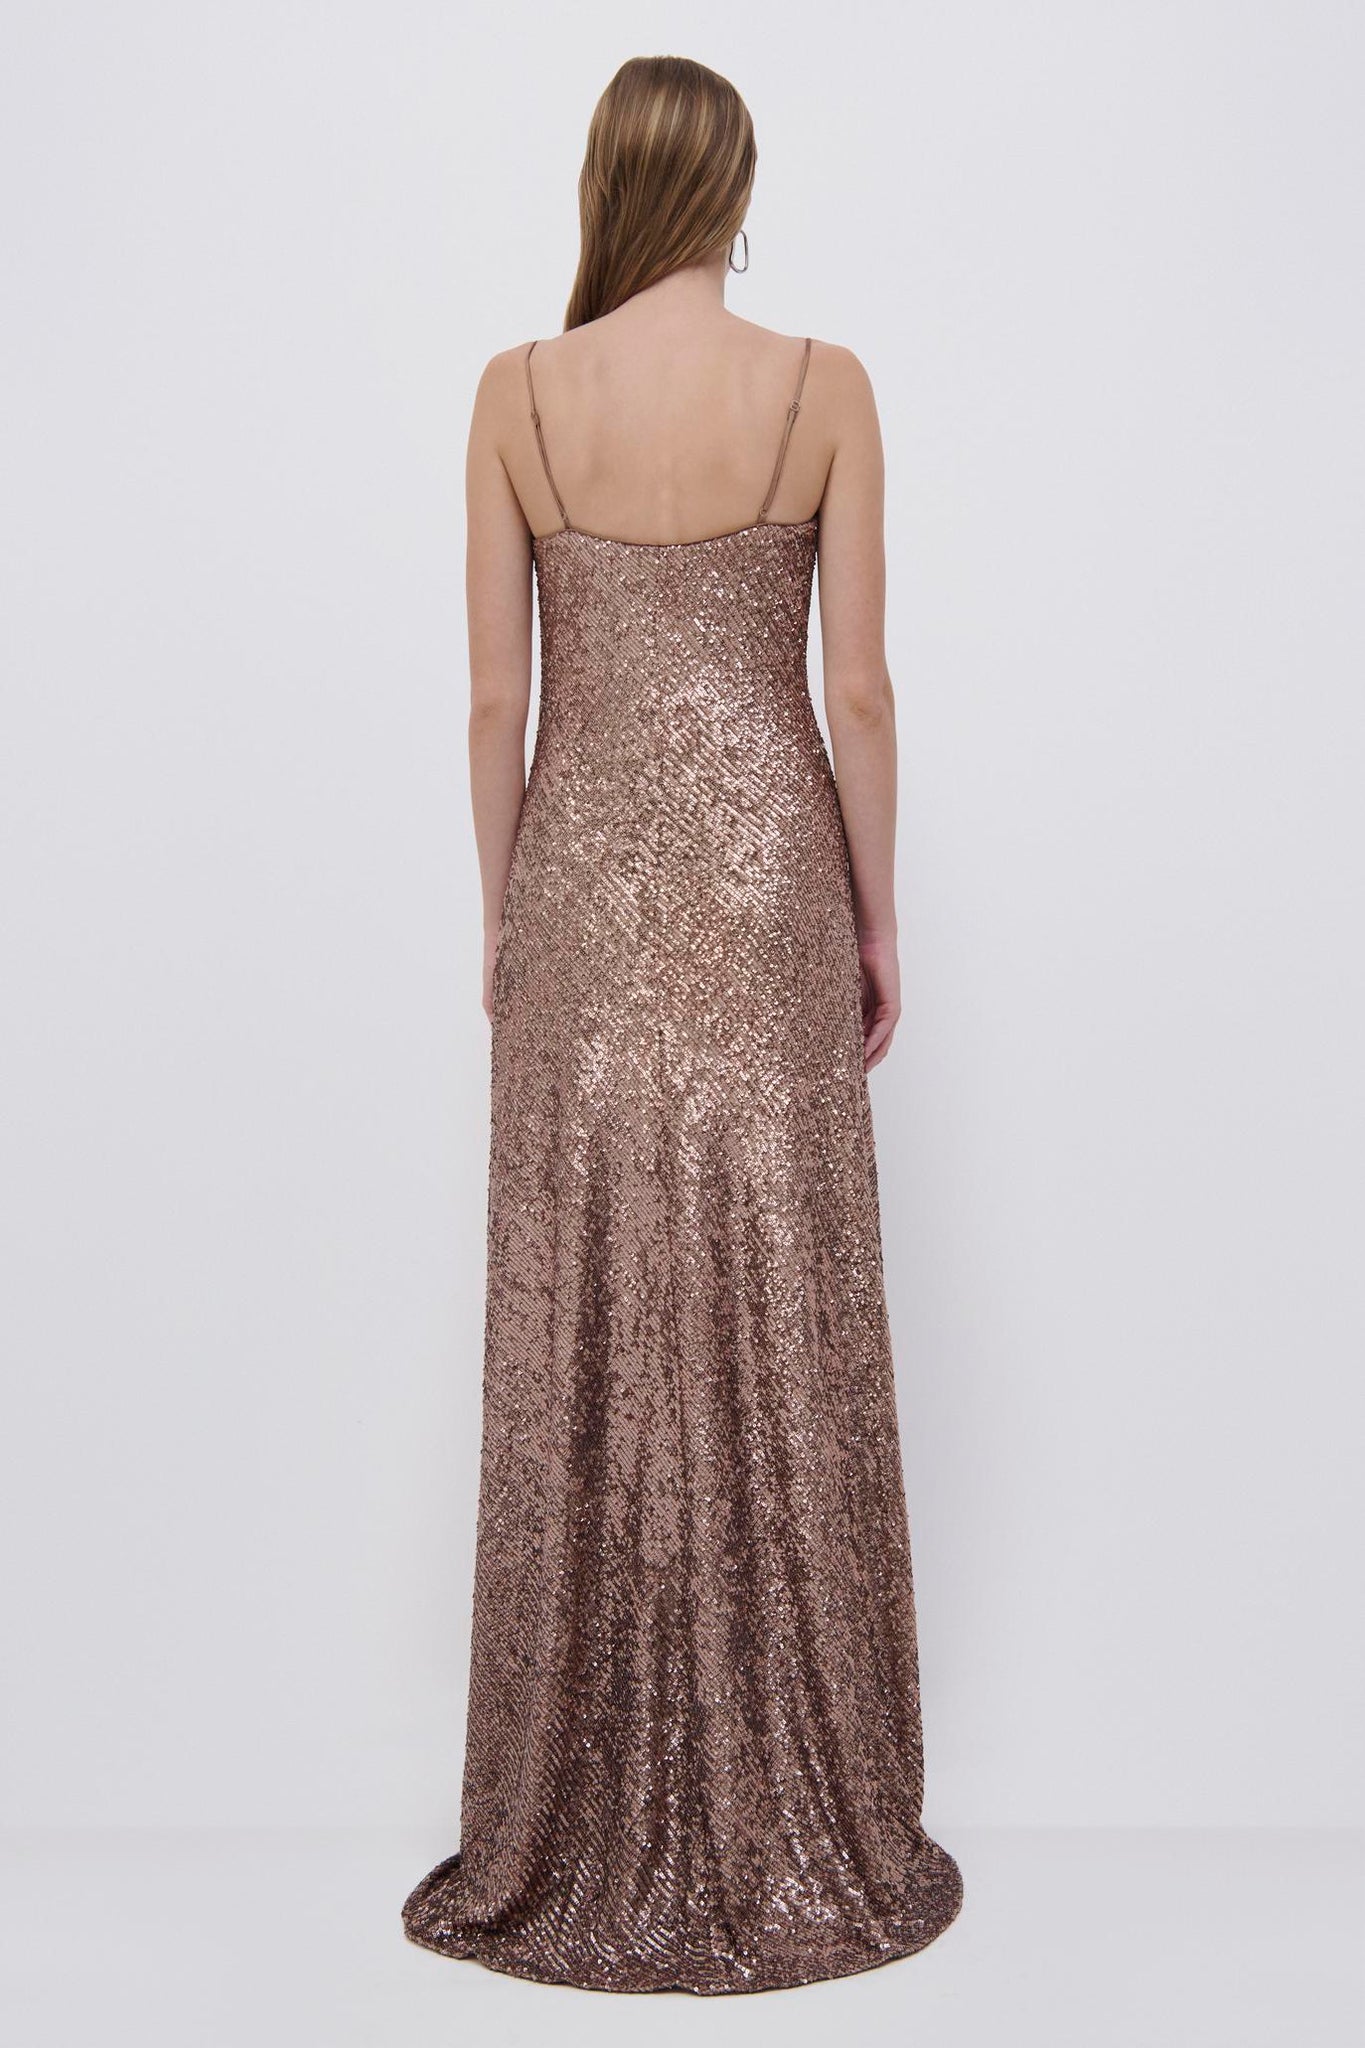 Finley Hammered Sequin Gown - SIMKHAI 